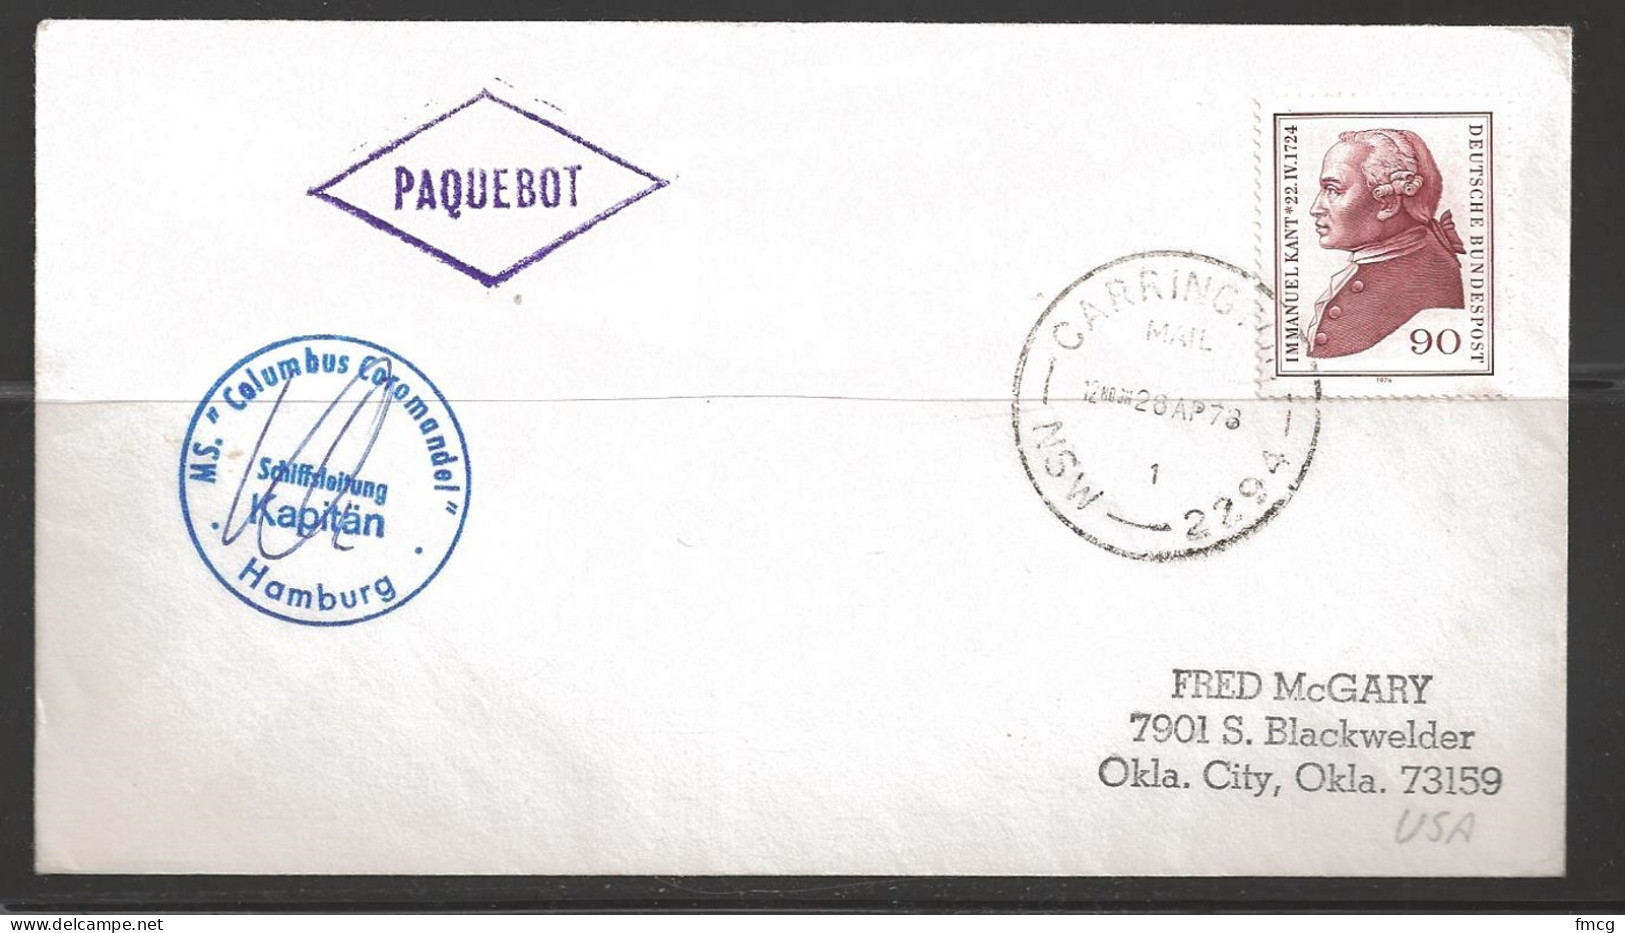 1978 Paquebot Cover, Germany Stamp Used In Carrington, NSW, Australia  - Covers & Documents